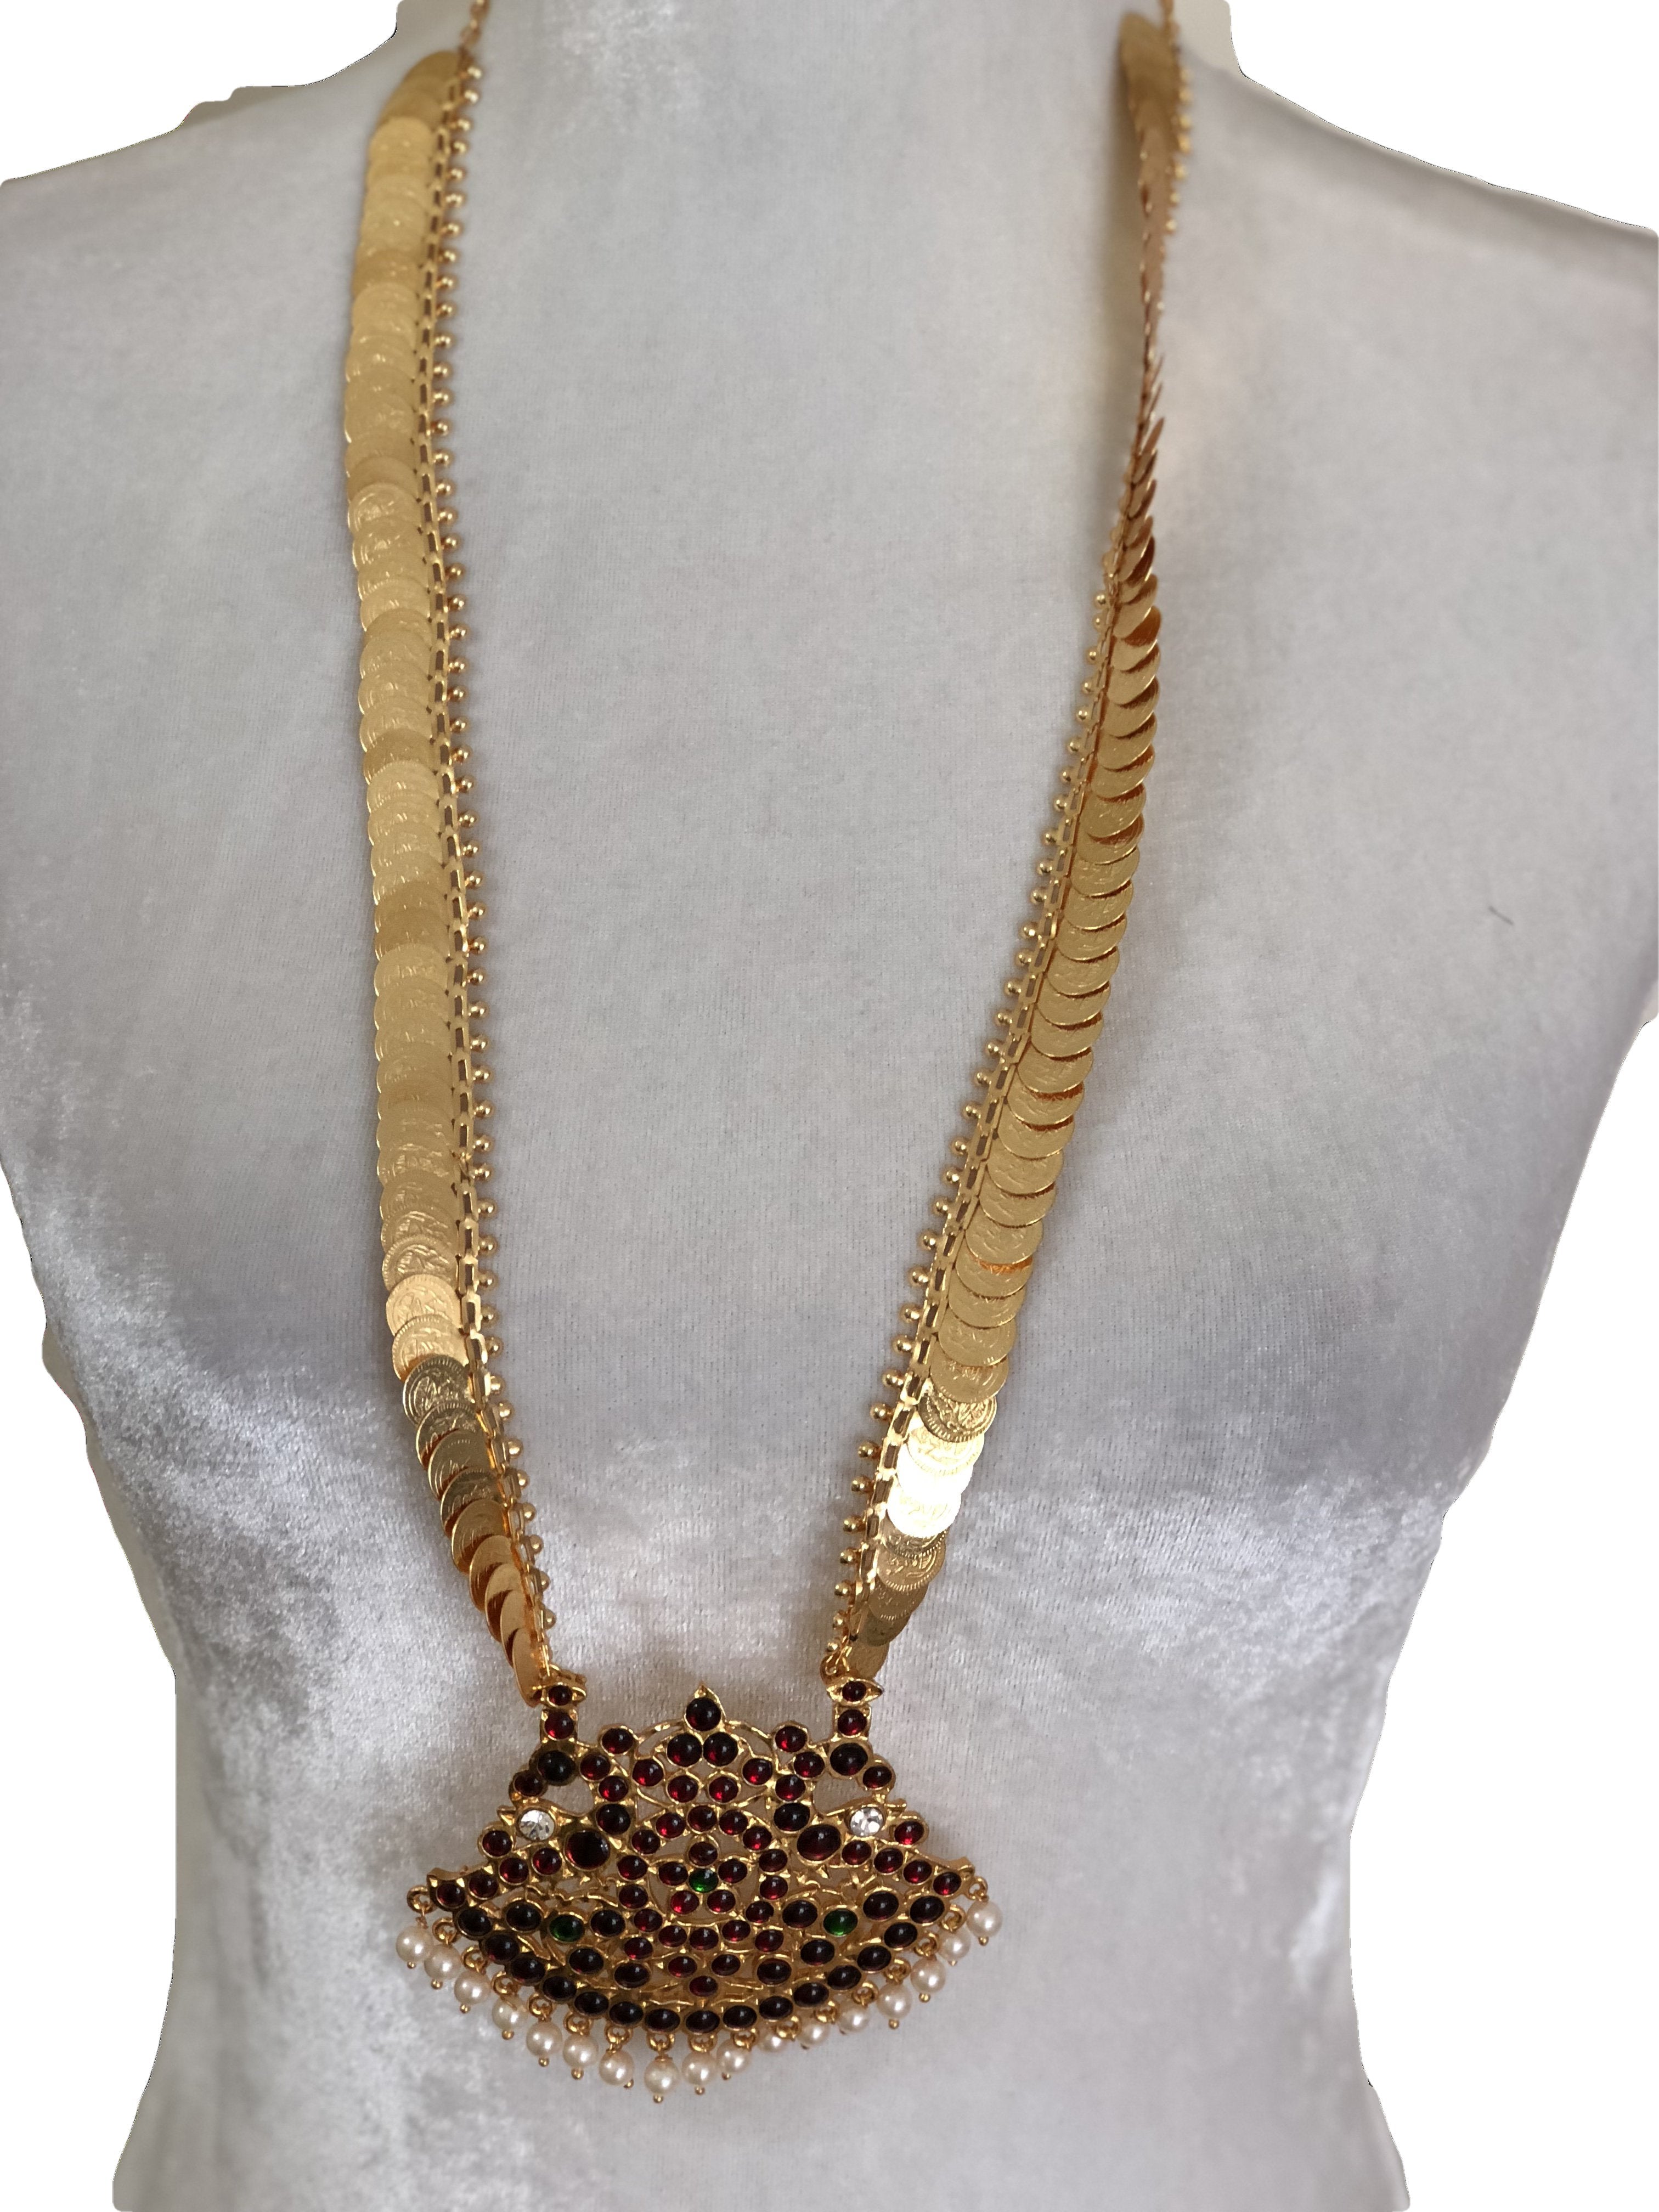 Goddess Laxmi Coin - Gold Plated Long Necklace - Gold Plated Pendant with Kemp stones and White Pearl Beads